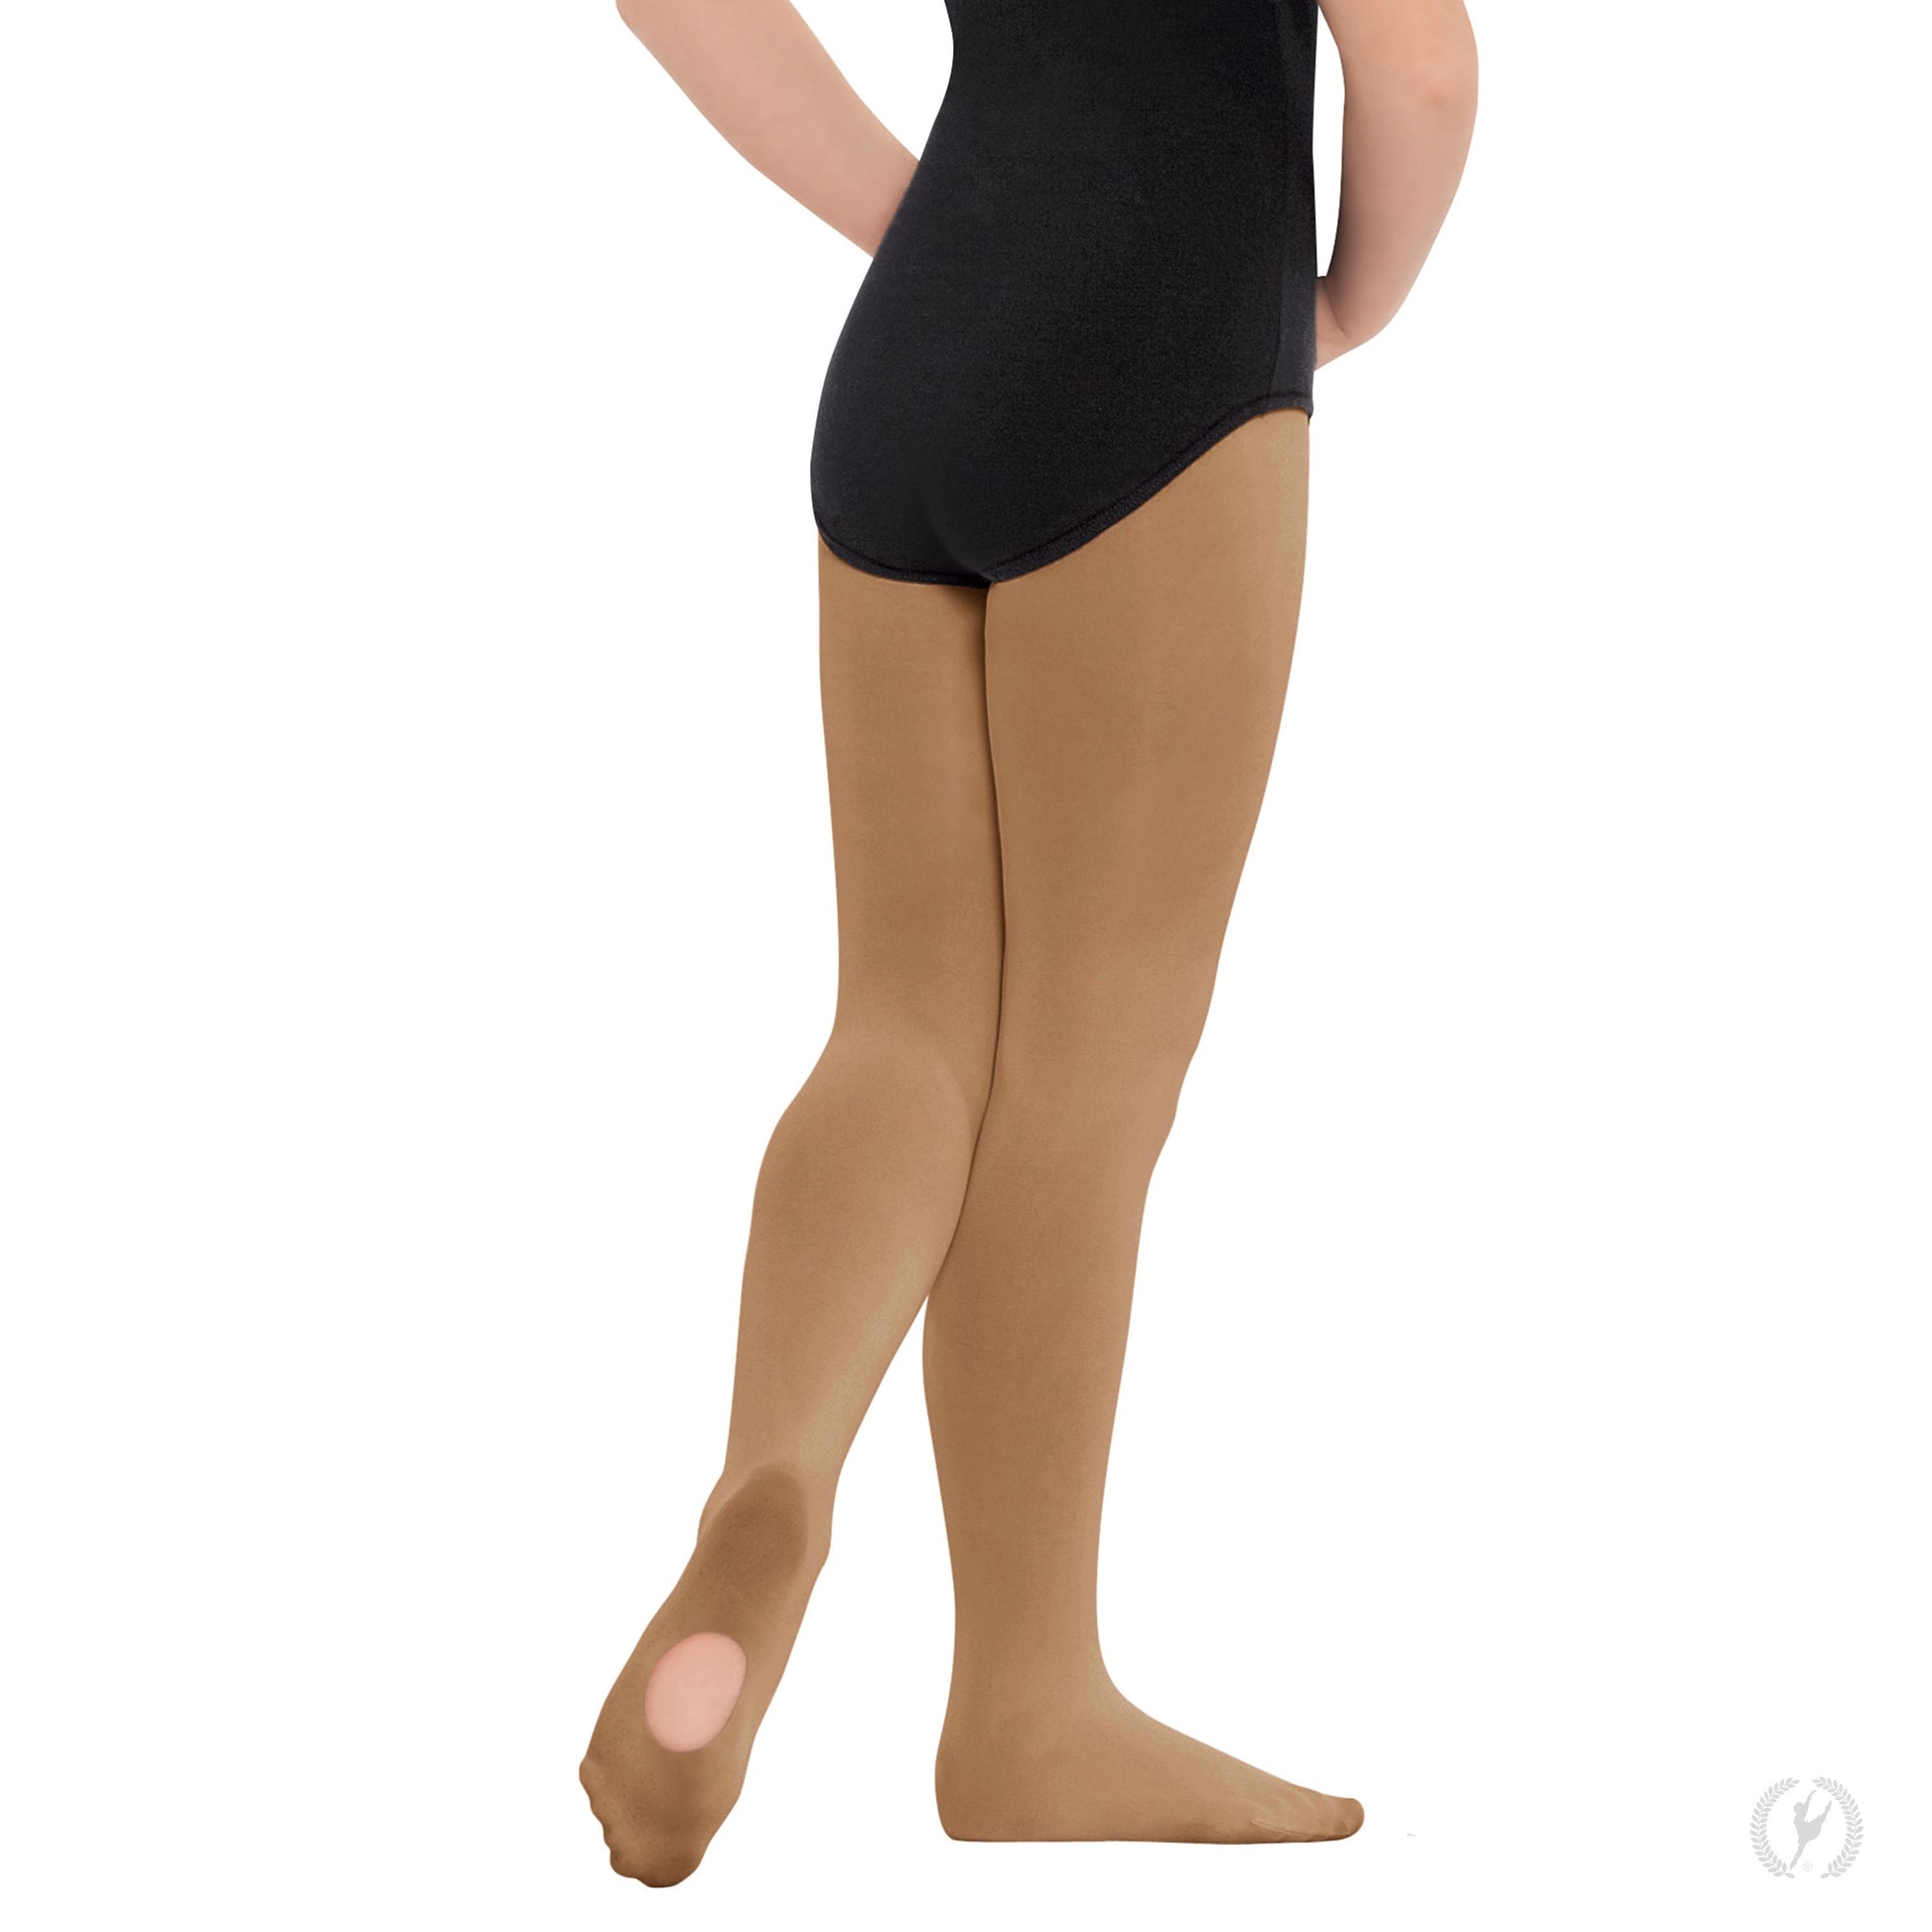 Eurotard 210c Non-Run Convertible Tights in Caramel sold by Dance Fashions Superstore in Roswell, Georgia. Dance Tights in Caramel for Girls.